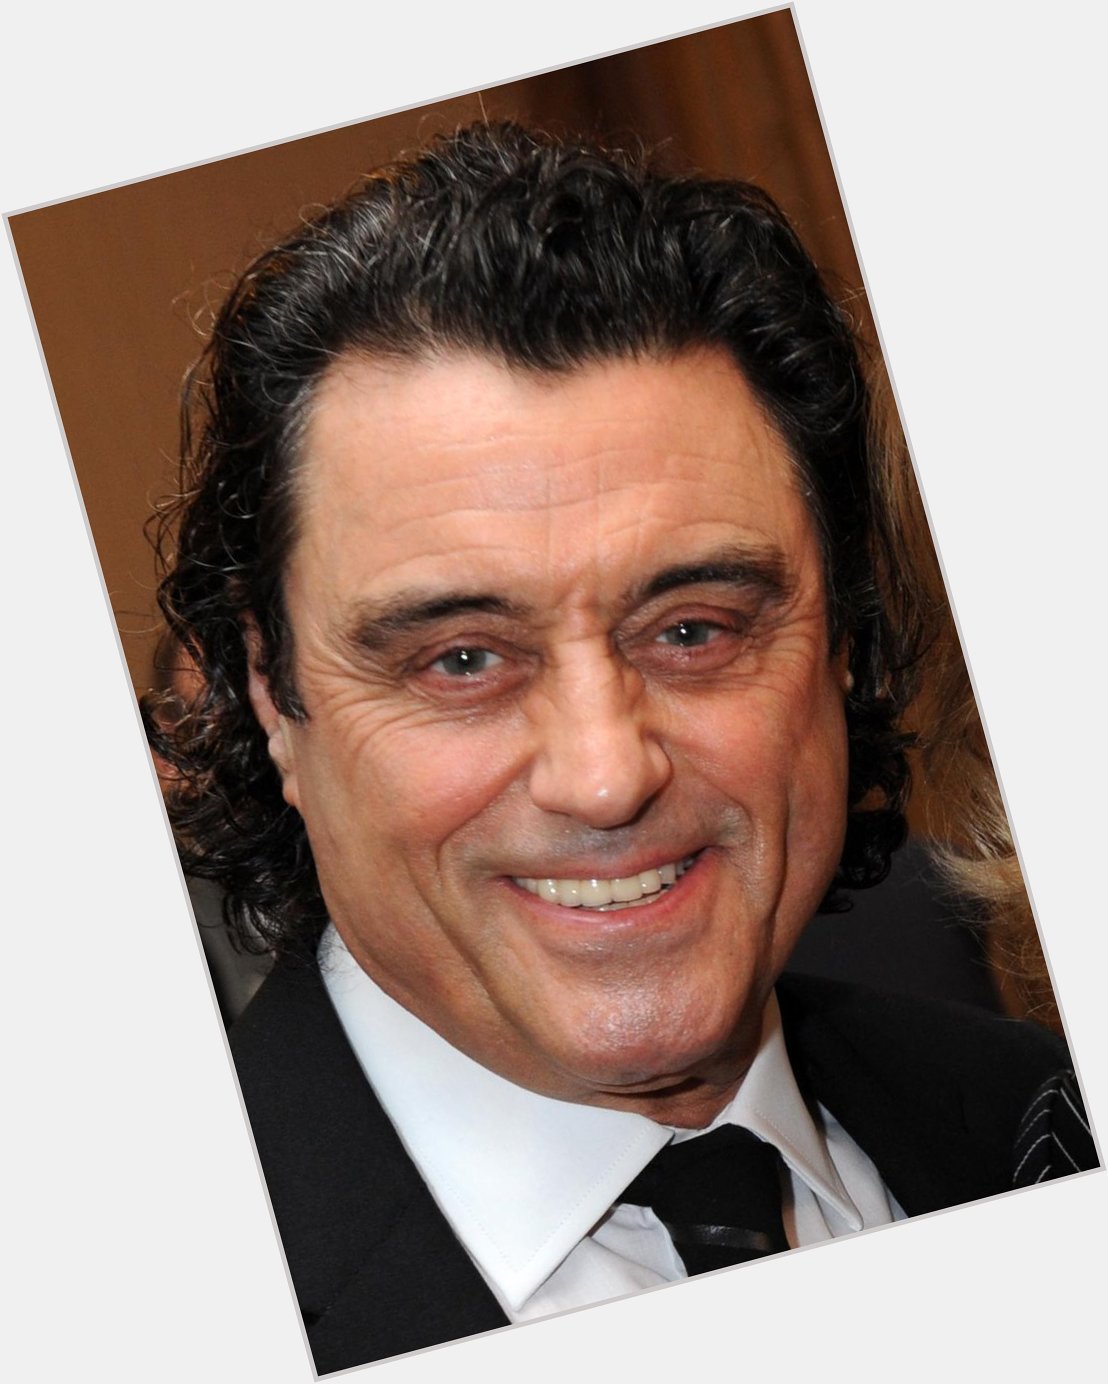  on with wishes Ian Mcshane a happy birthday! 